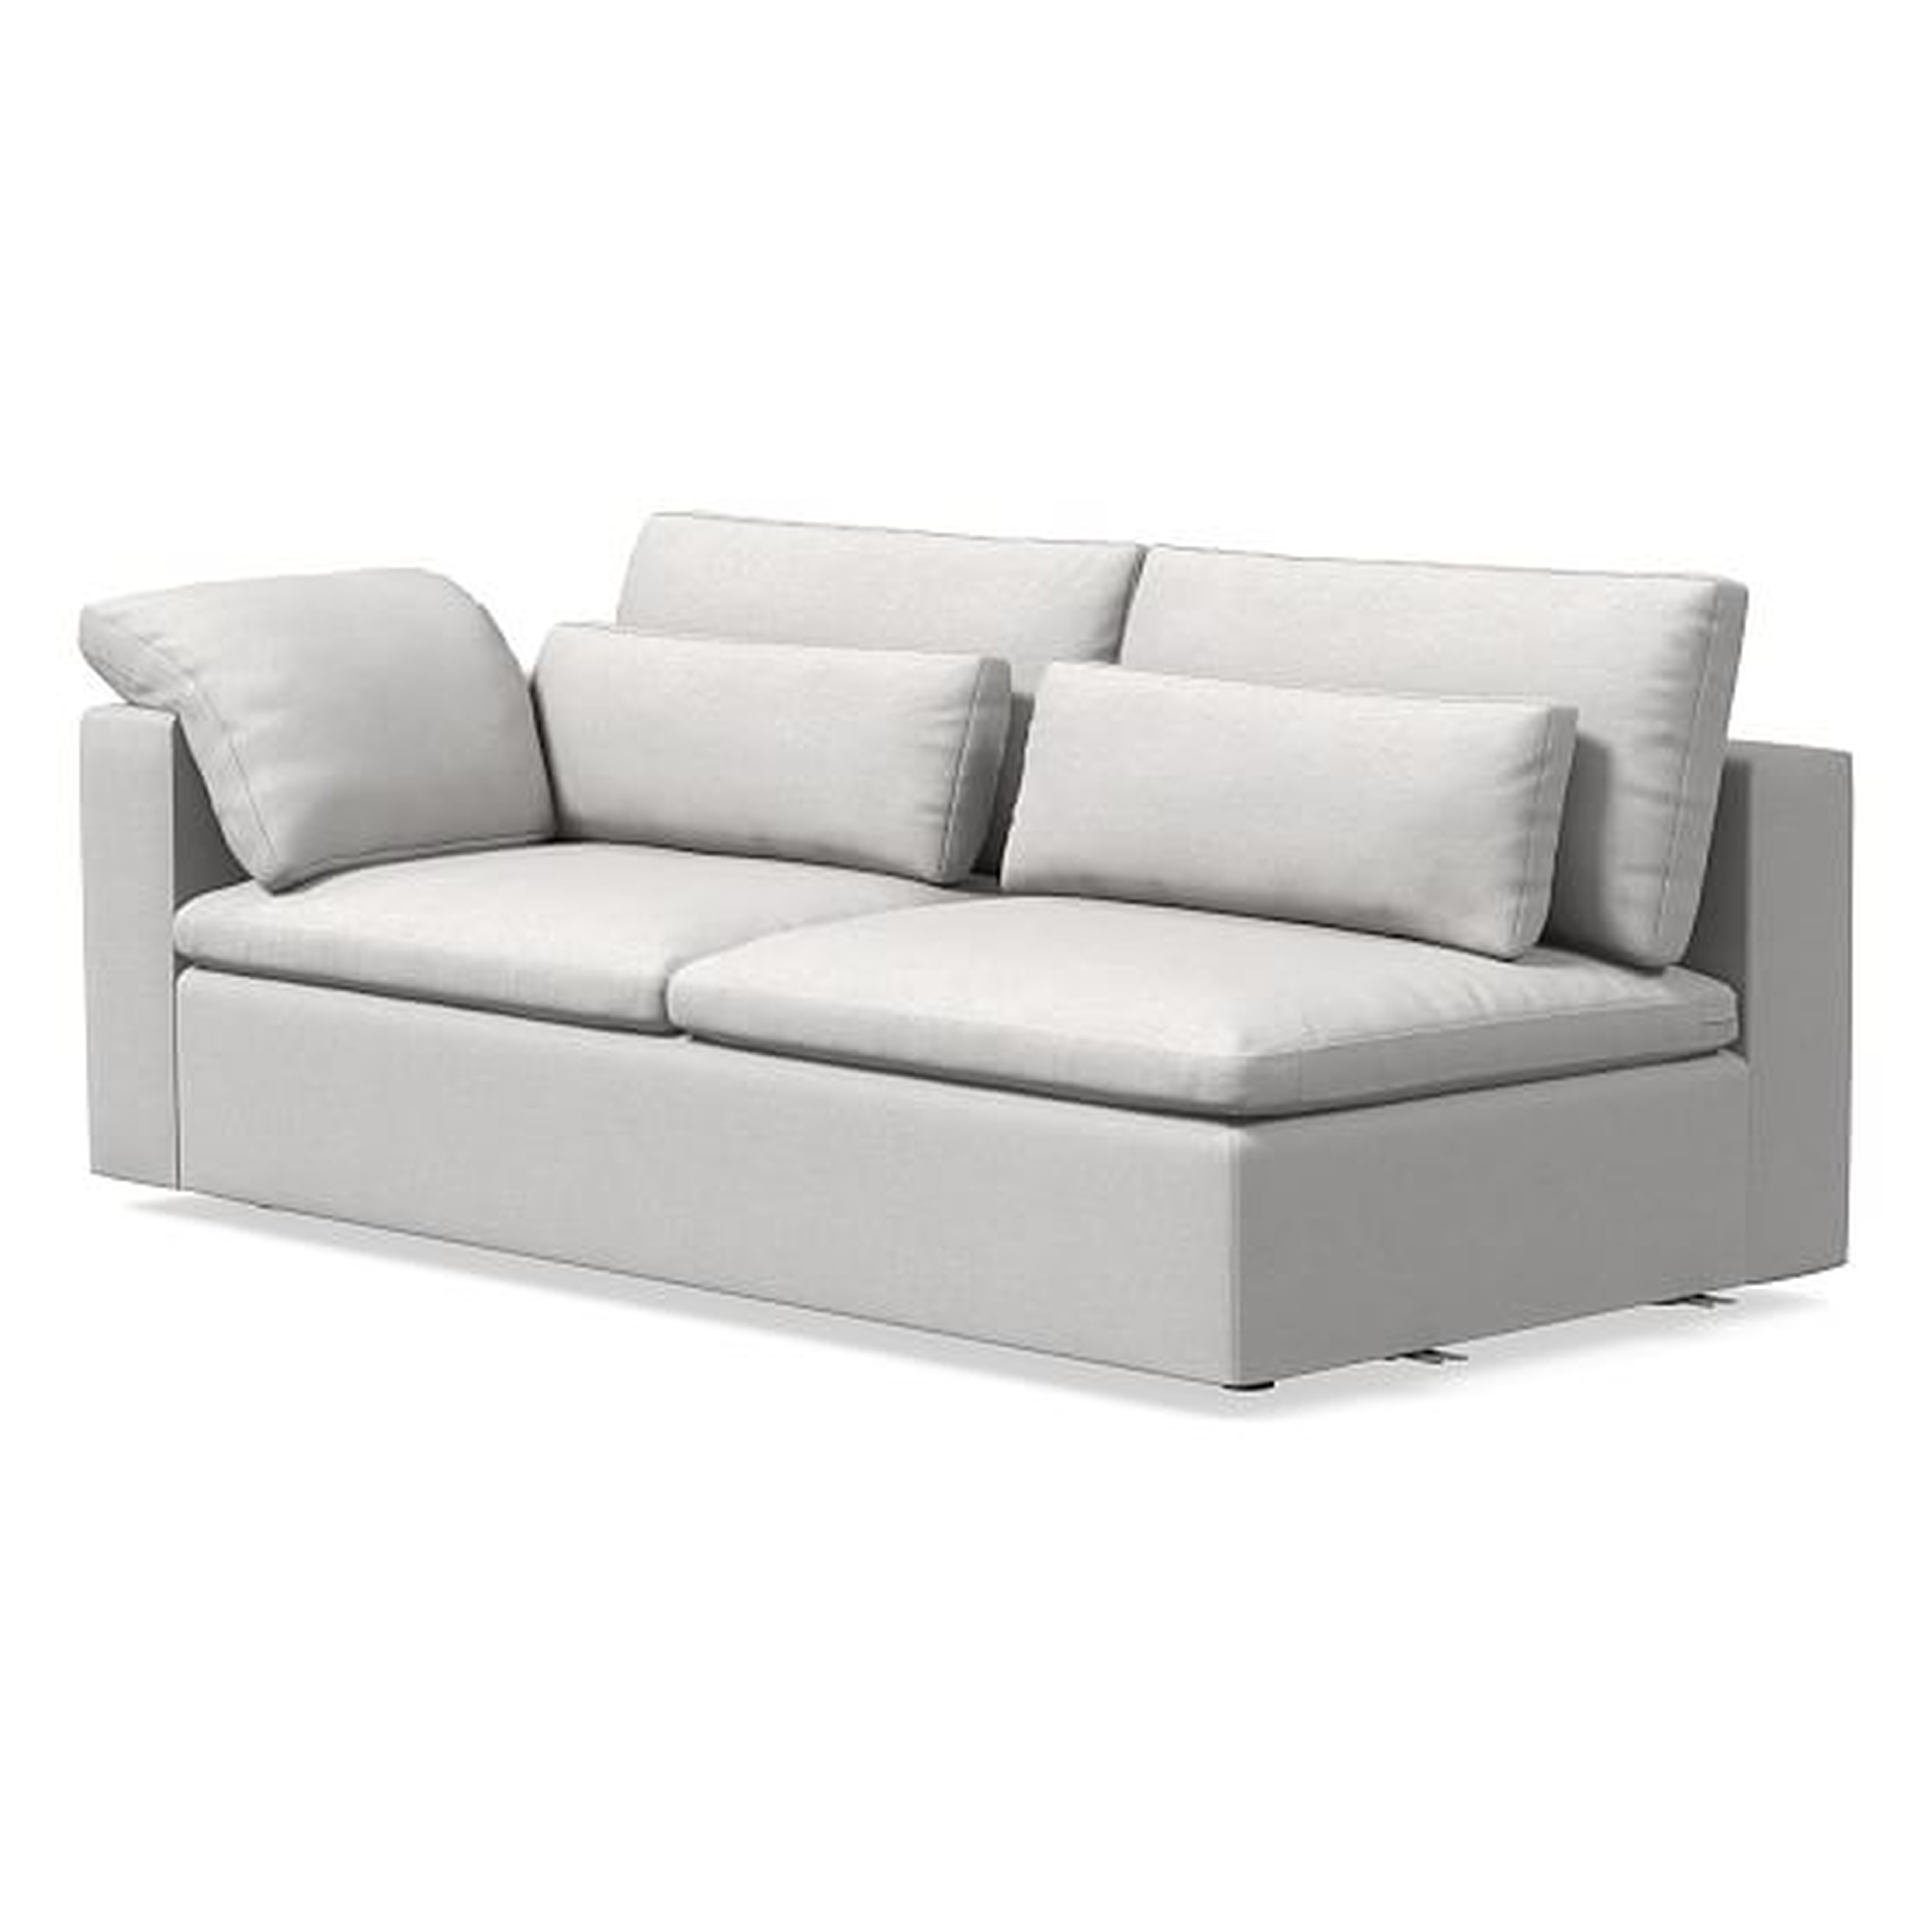 Harmony Modular Left Arm Sleeper Sofa, Down, Eco Weave, Oyster, Concealed Supports - West Elm